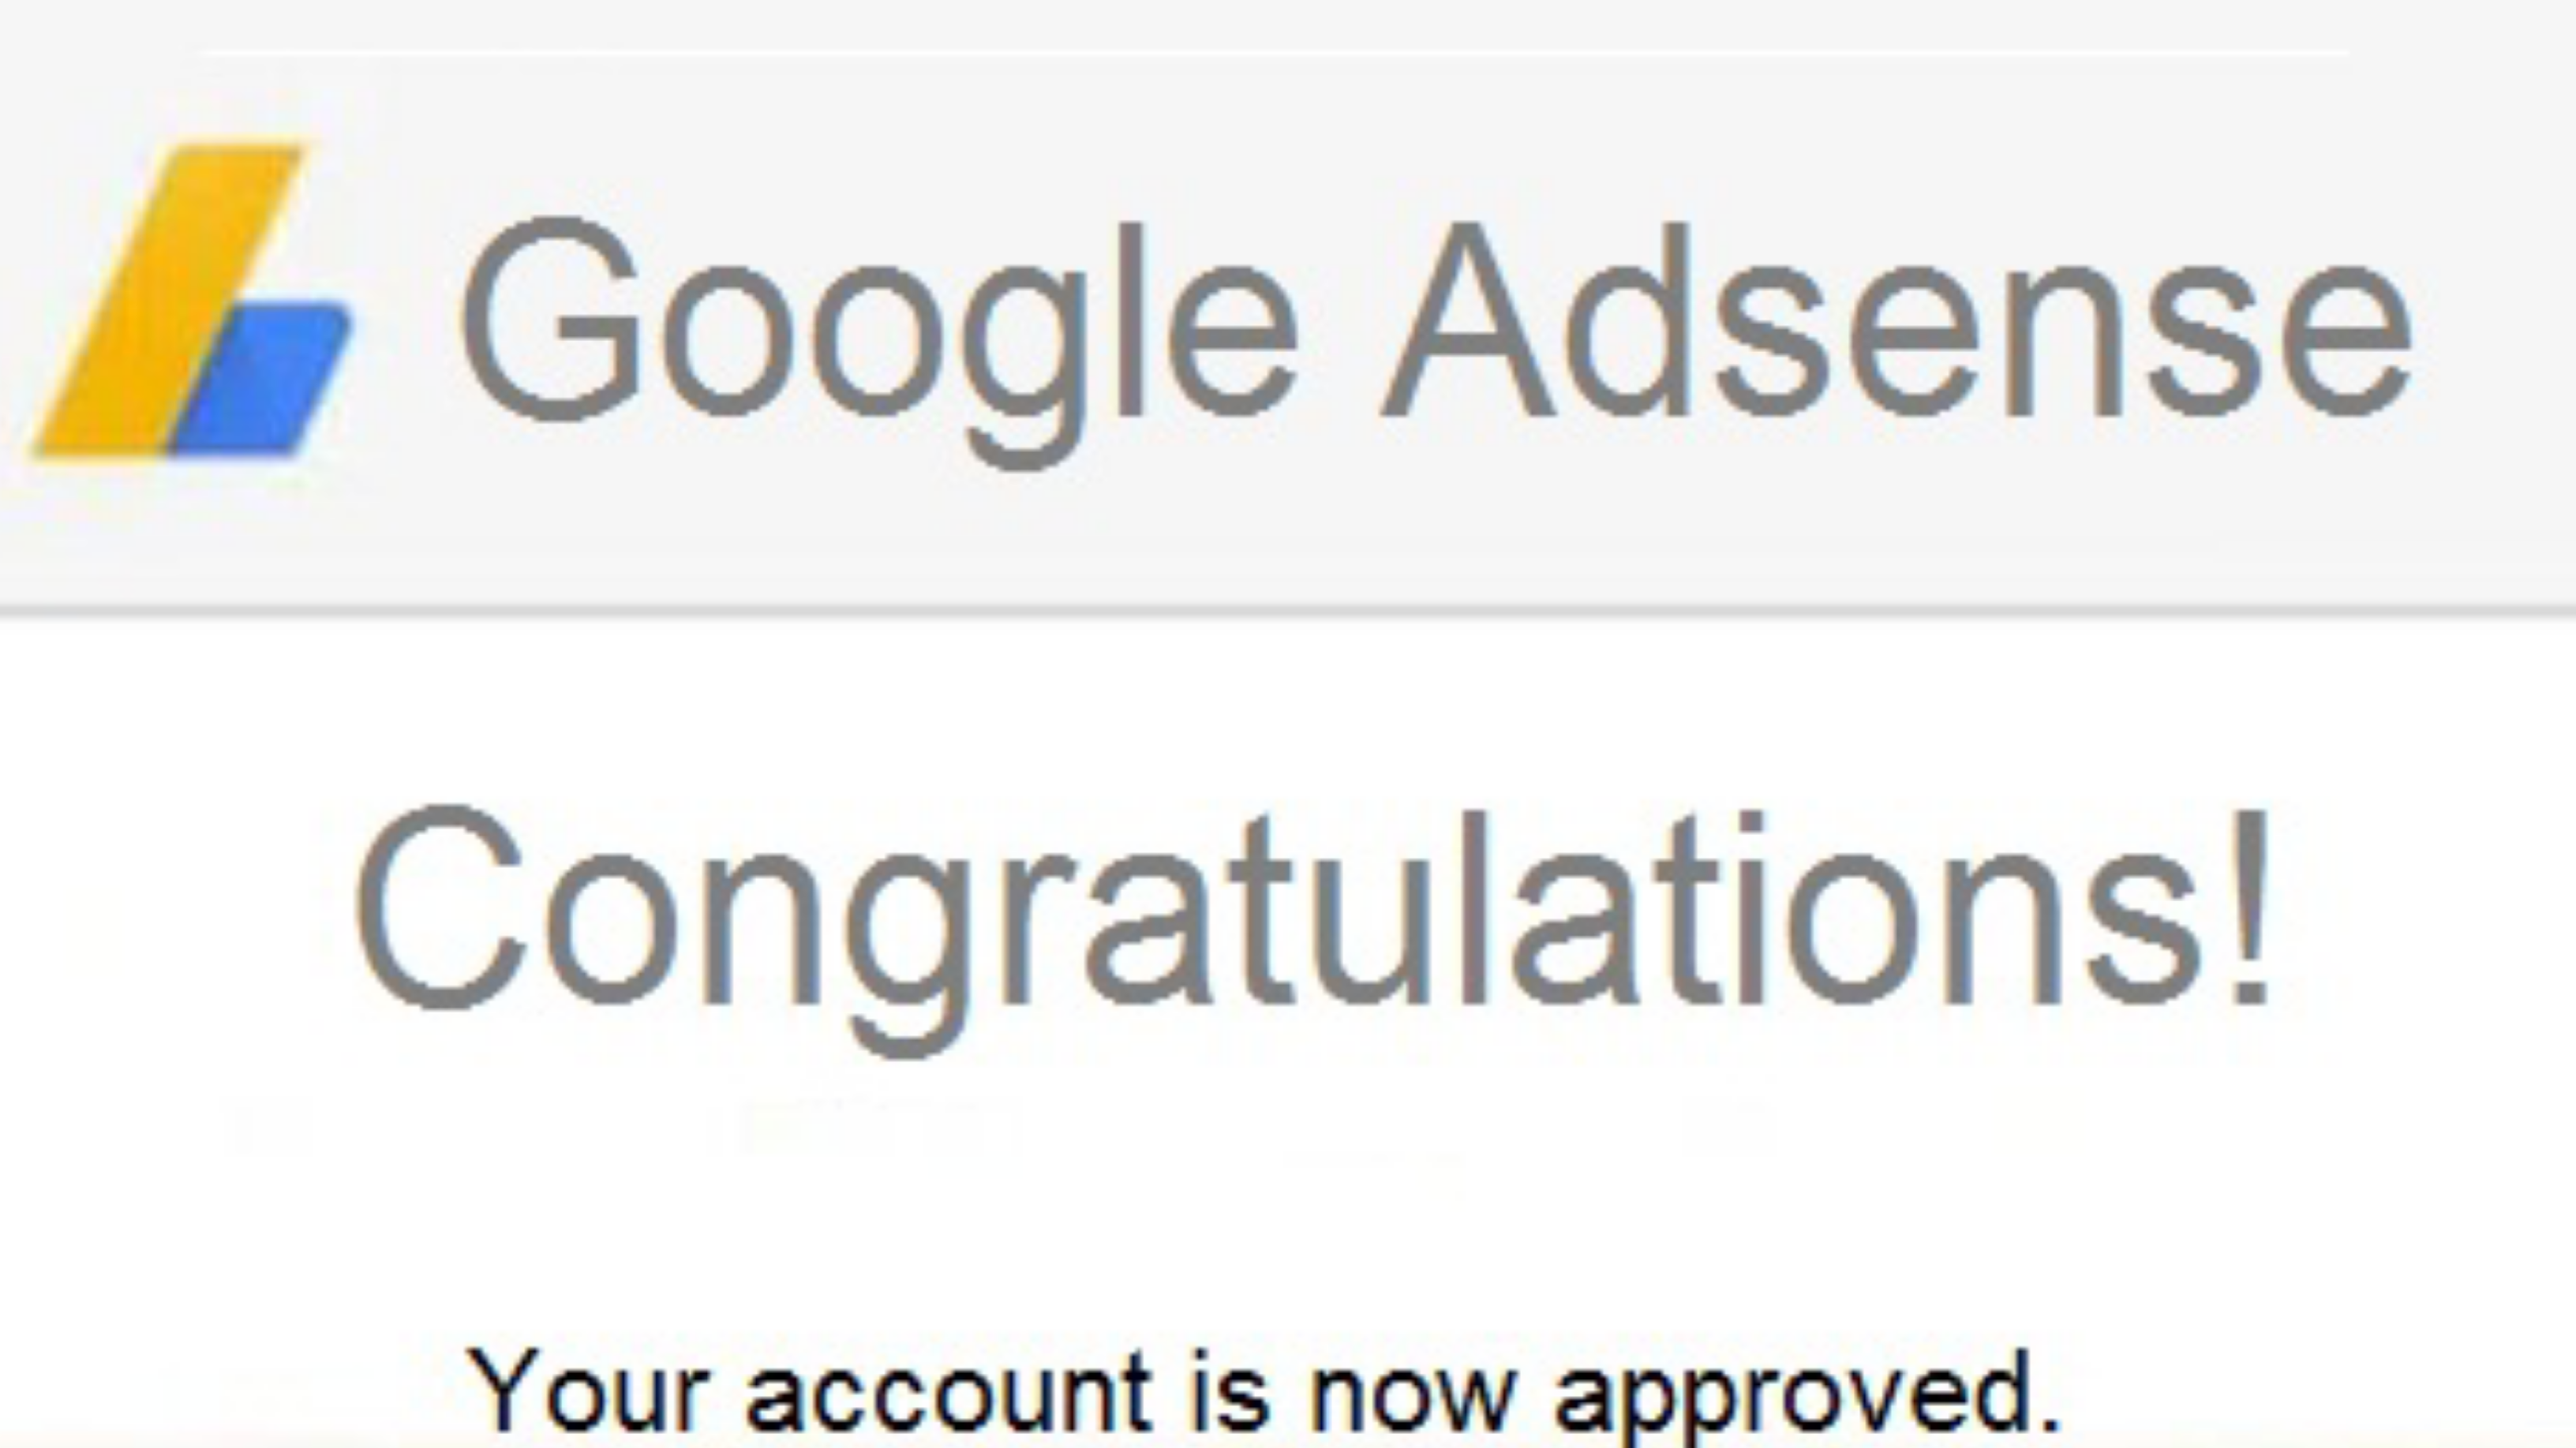 How many days has the NP domain been approved by Google AdSense